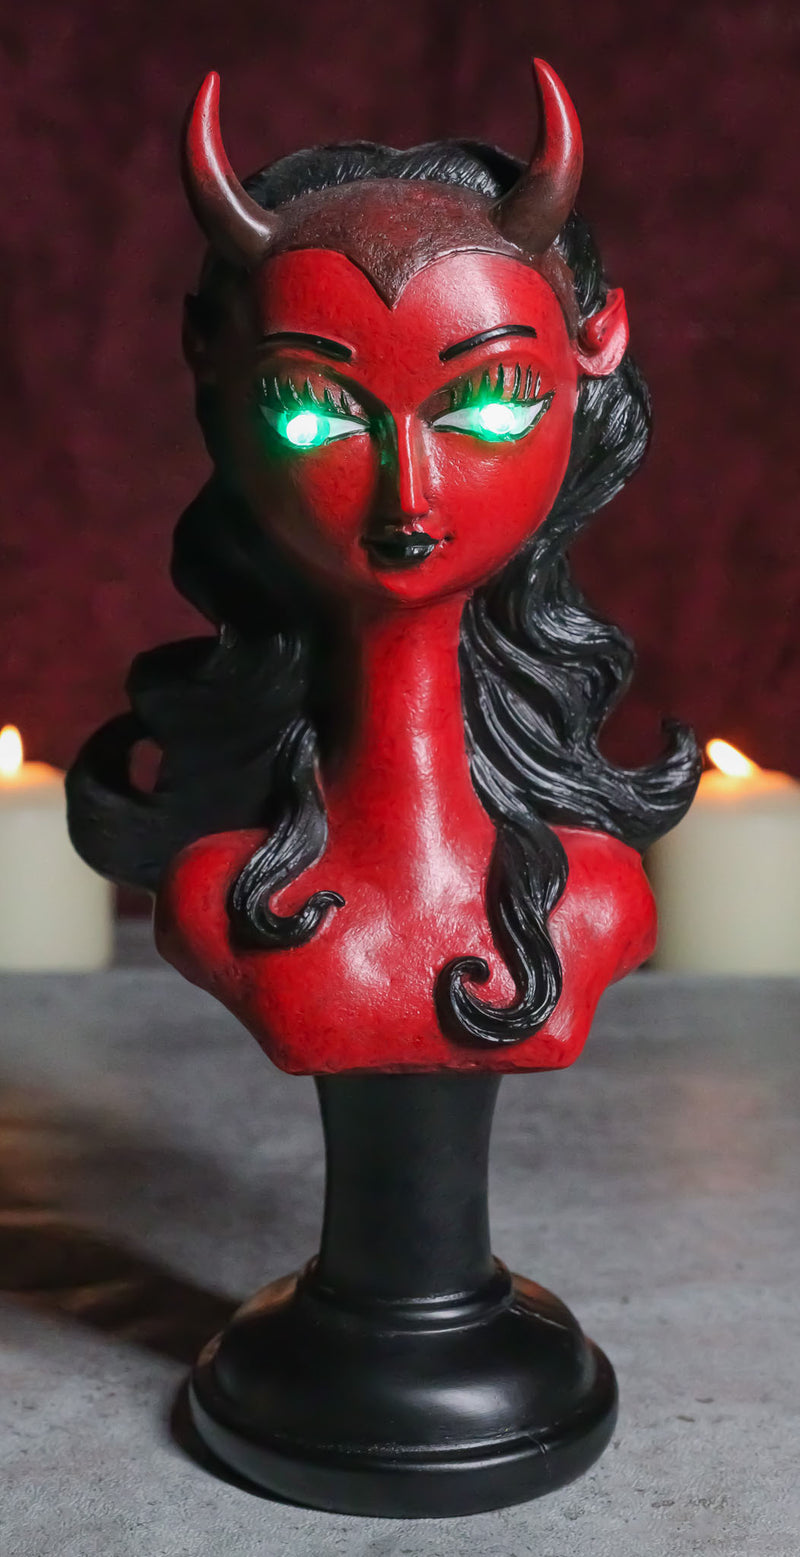 Horned Lilith Hell Demon Devil Queen Bust Figurine With Green LED Light Up Eyes